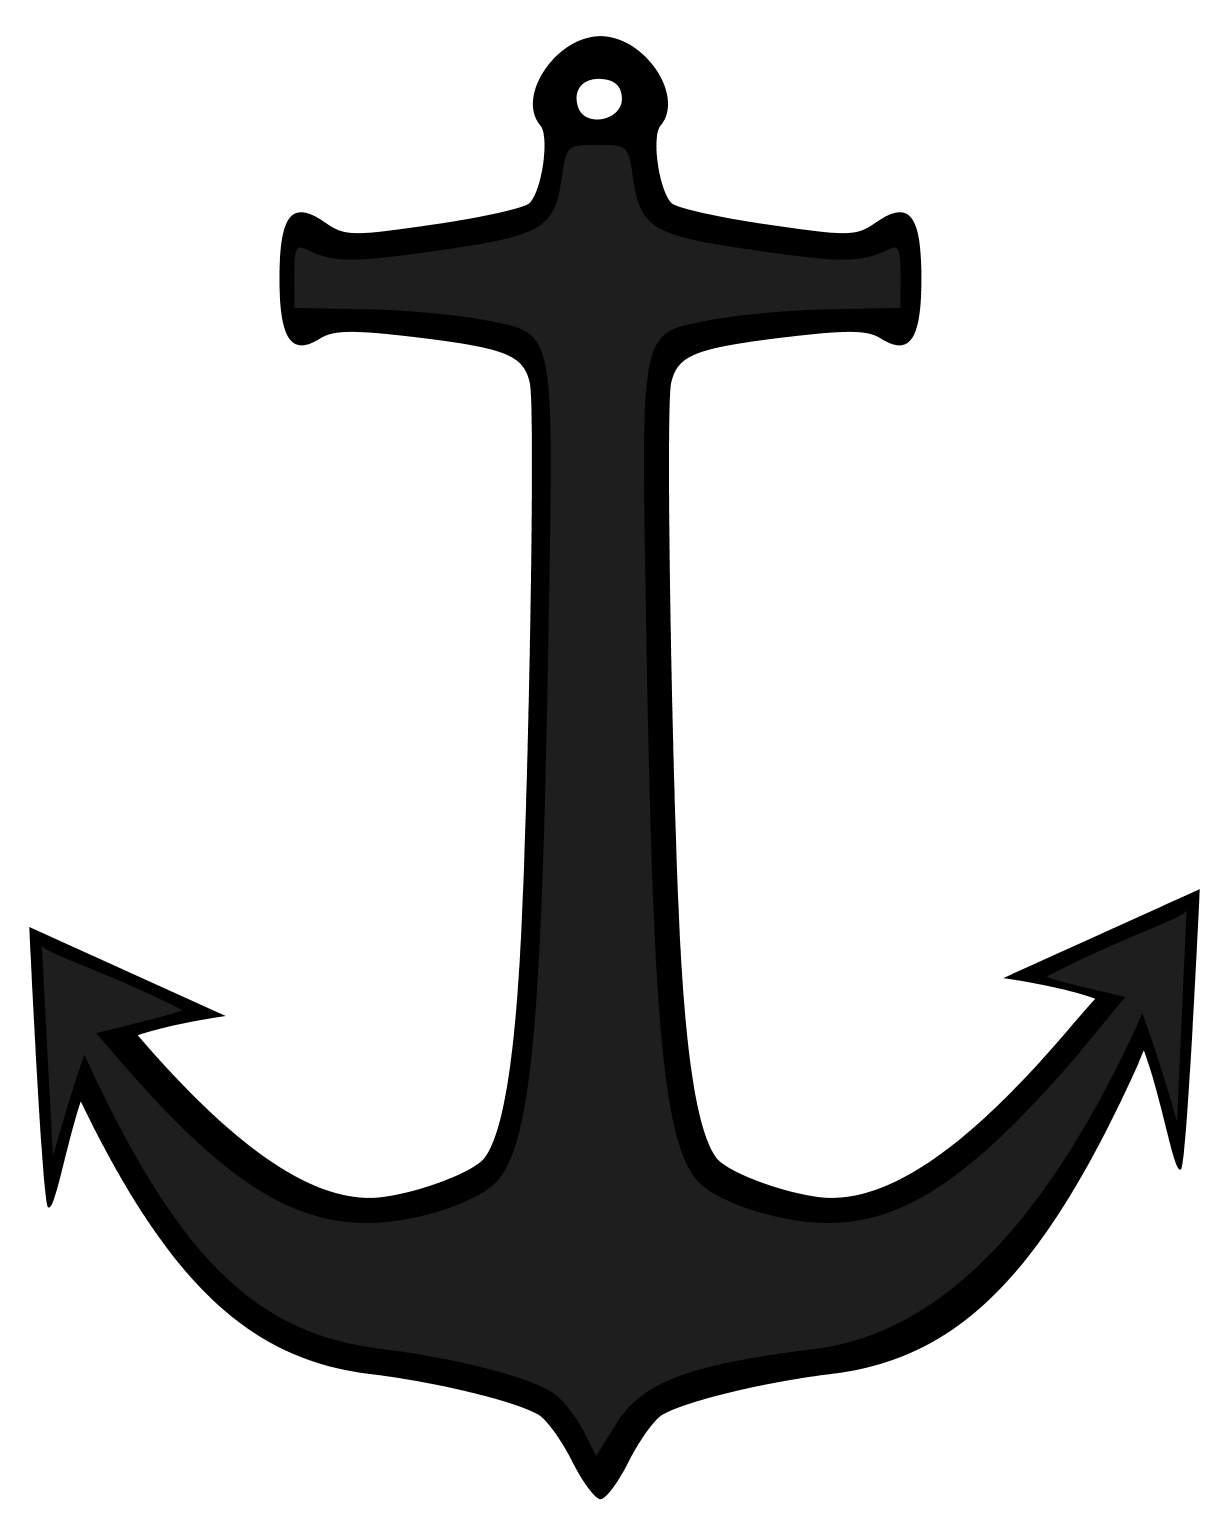 Ship Anchors - Clipart library